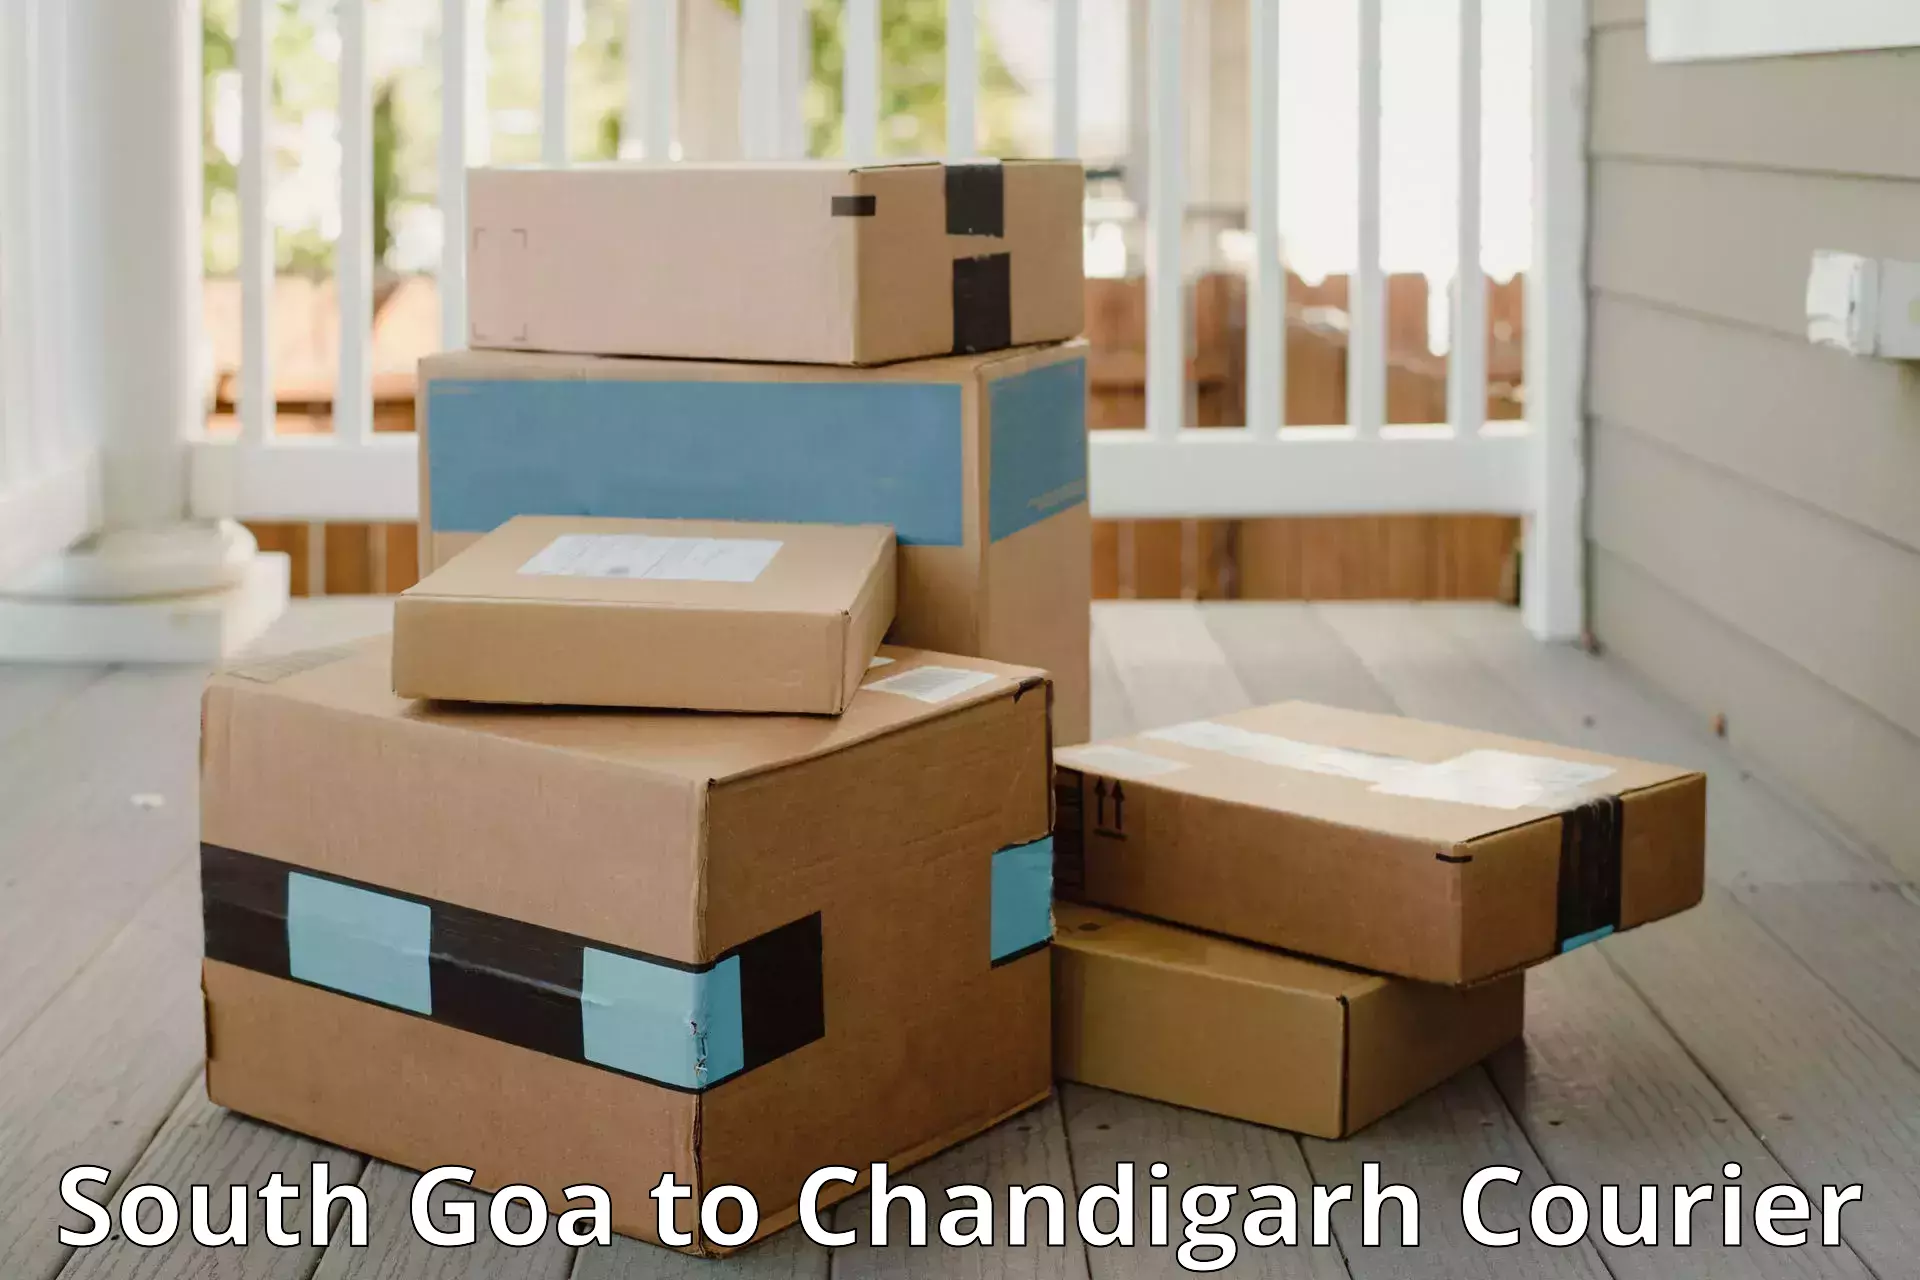 Baggage transport network South Goa to Chandigarh